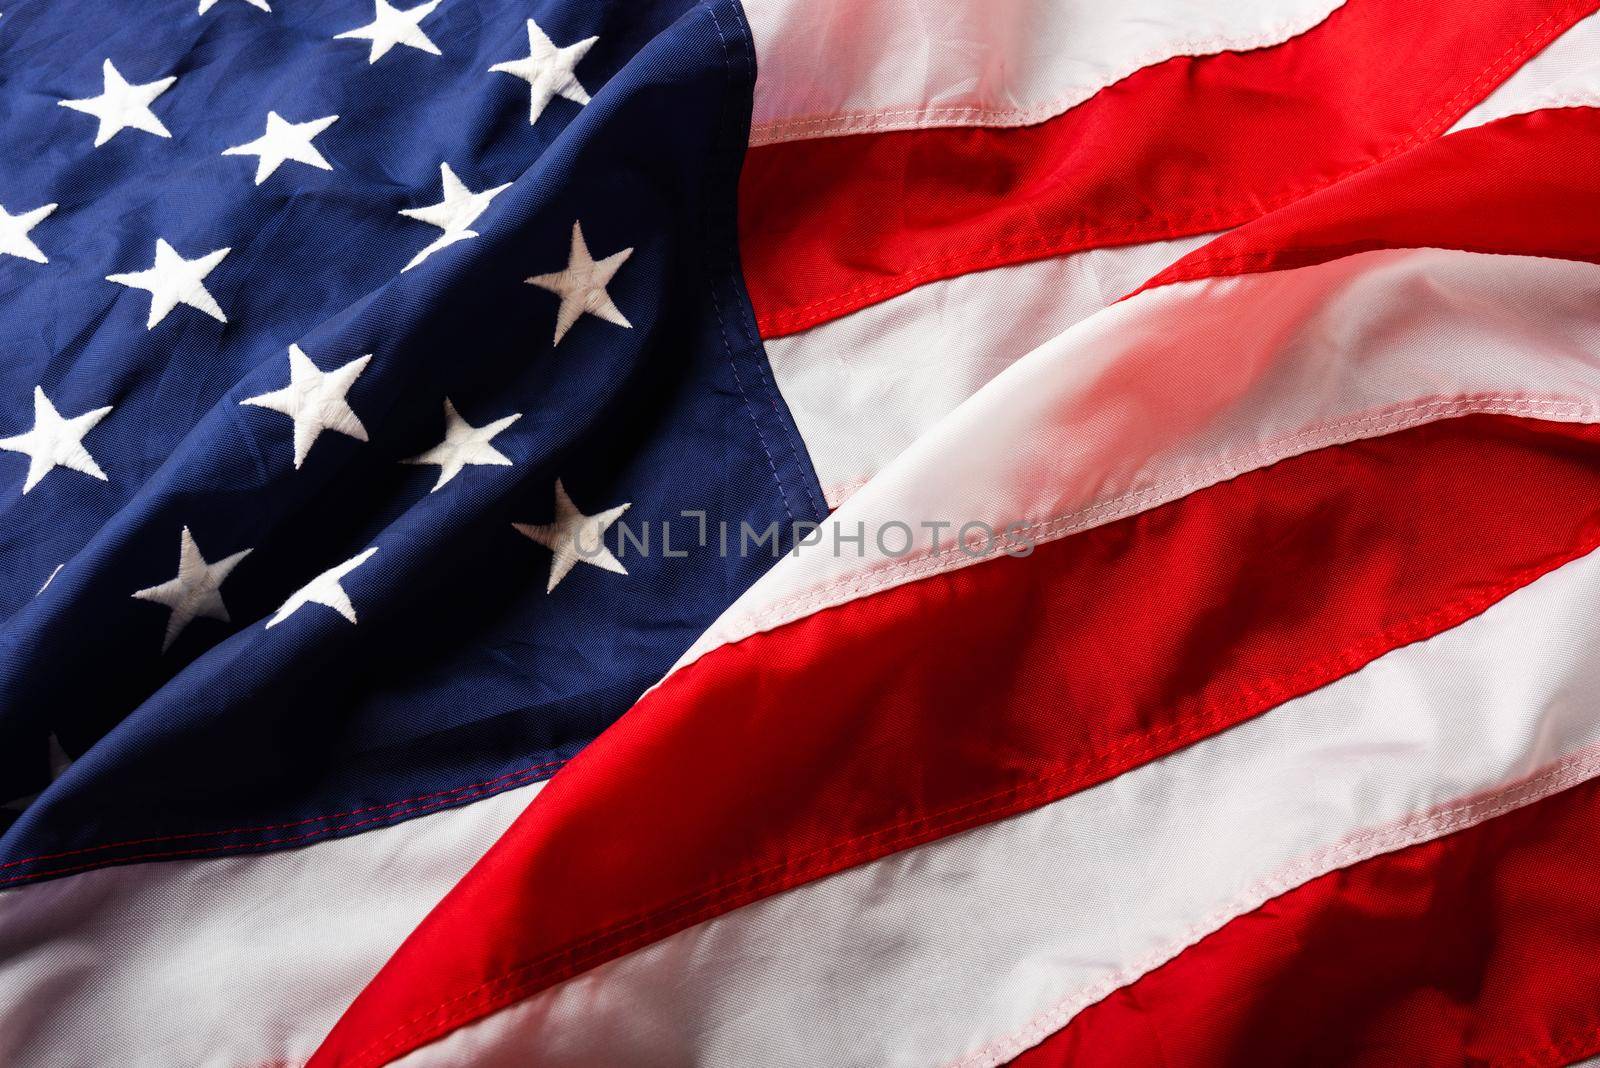 America United States flag, memorial remembrance and thank you of hero, studio shot with copy space concrete board background, USA holiday Veterans or Independence day concept